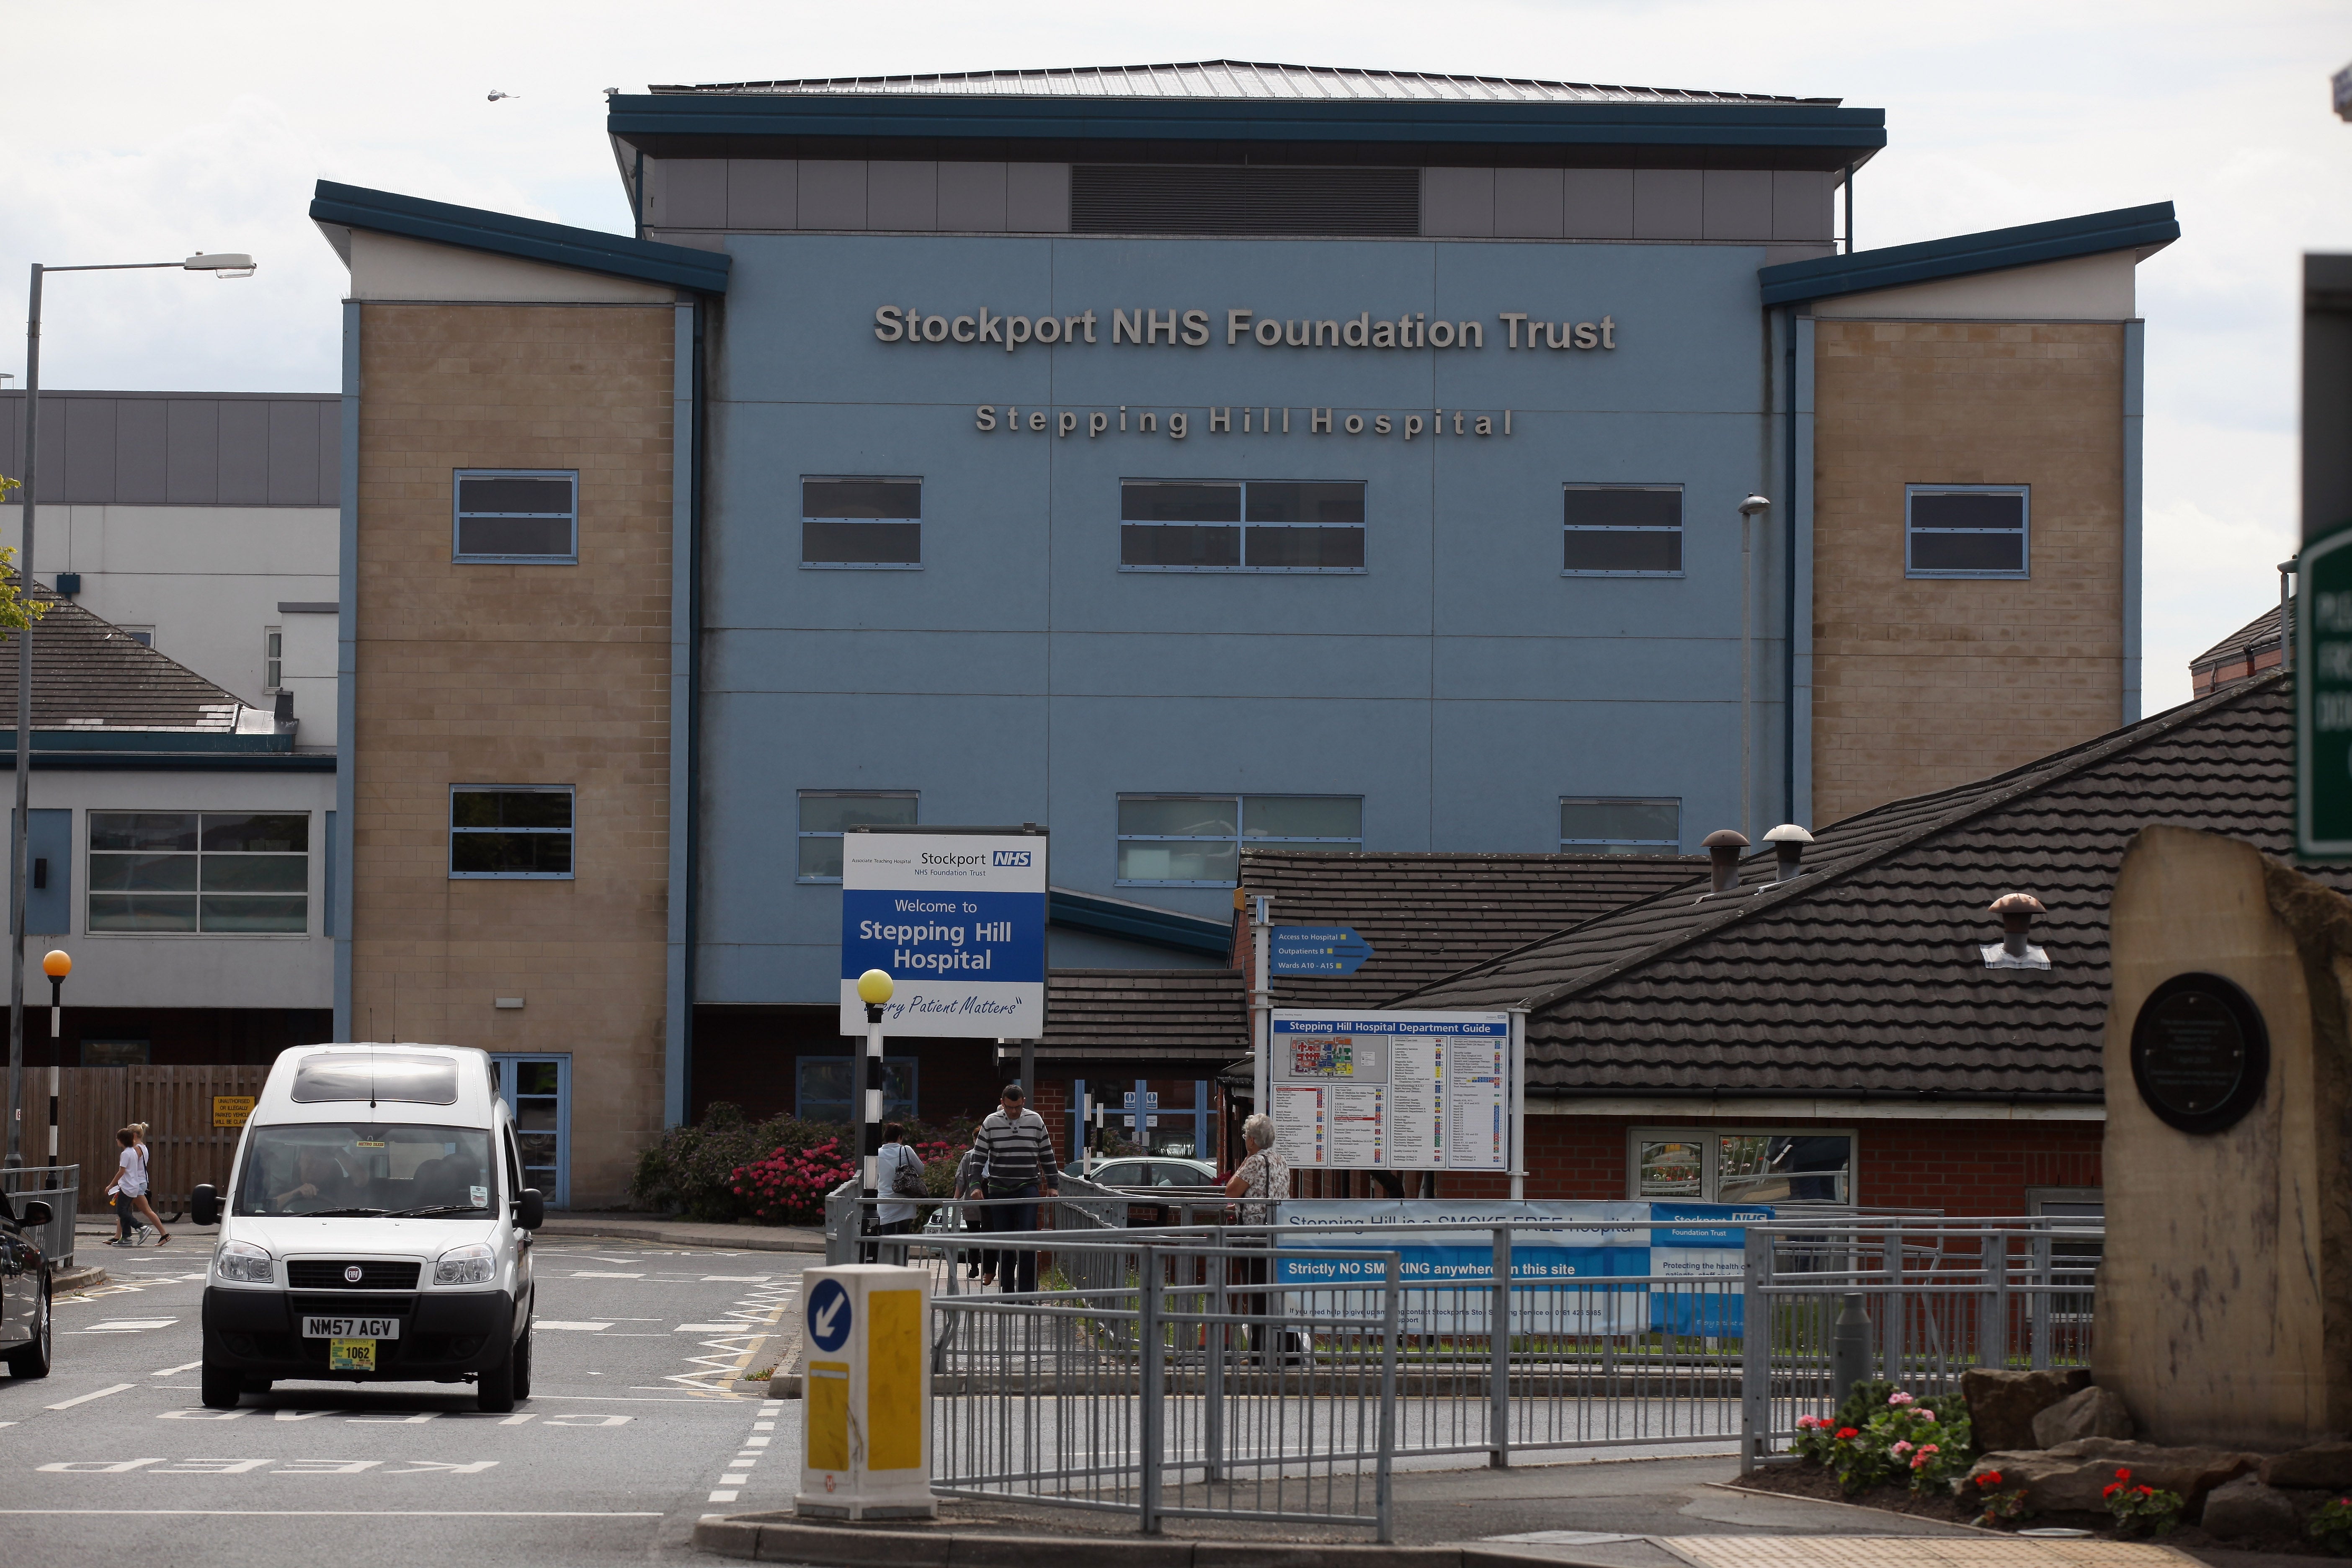 The 15-year-old boy was taken to Stepping Hill NHS Hospital in Stockport